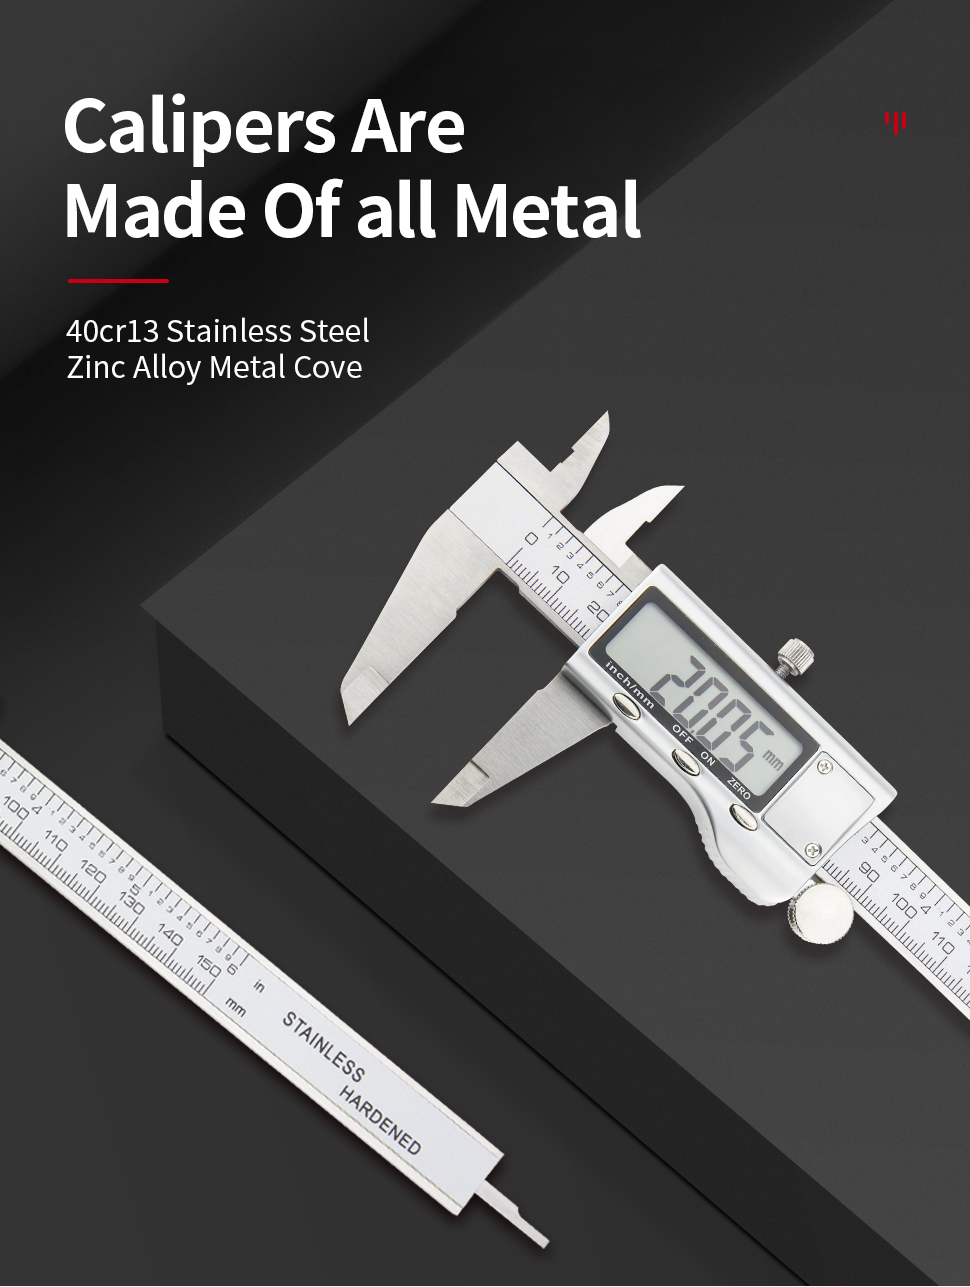 Stainless-Steel-Digital-metal-Fraction-Caliper-150mm-mm-Inch-High-Precision-large-LCD-display-Vernie-1524240-4